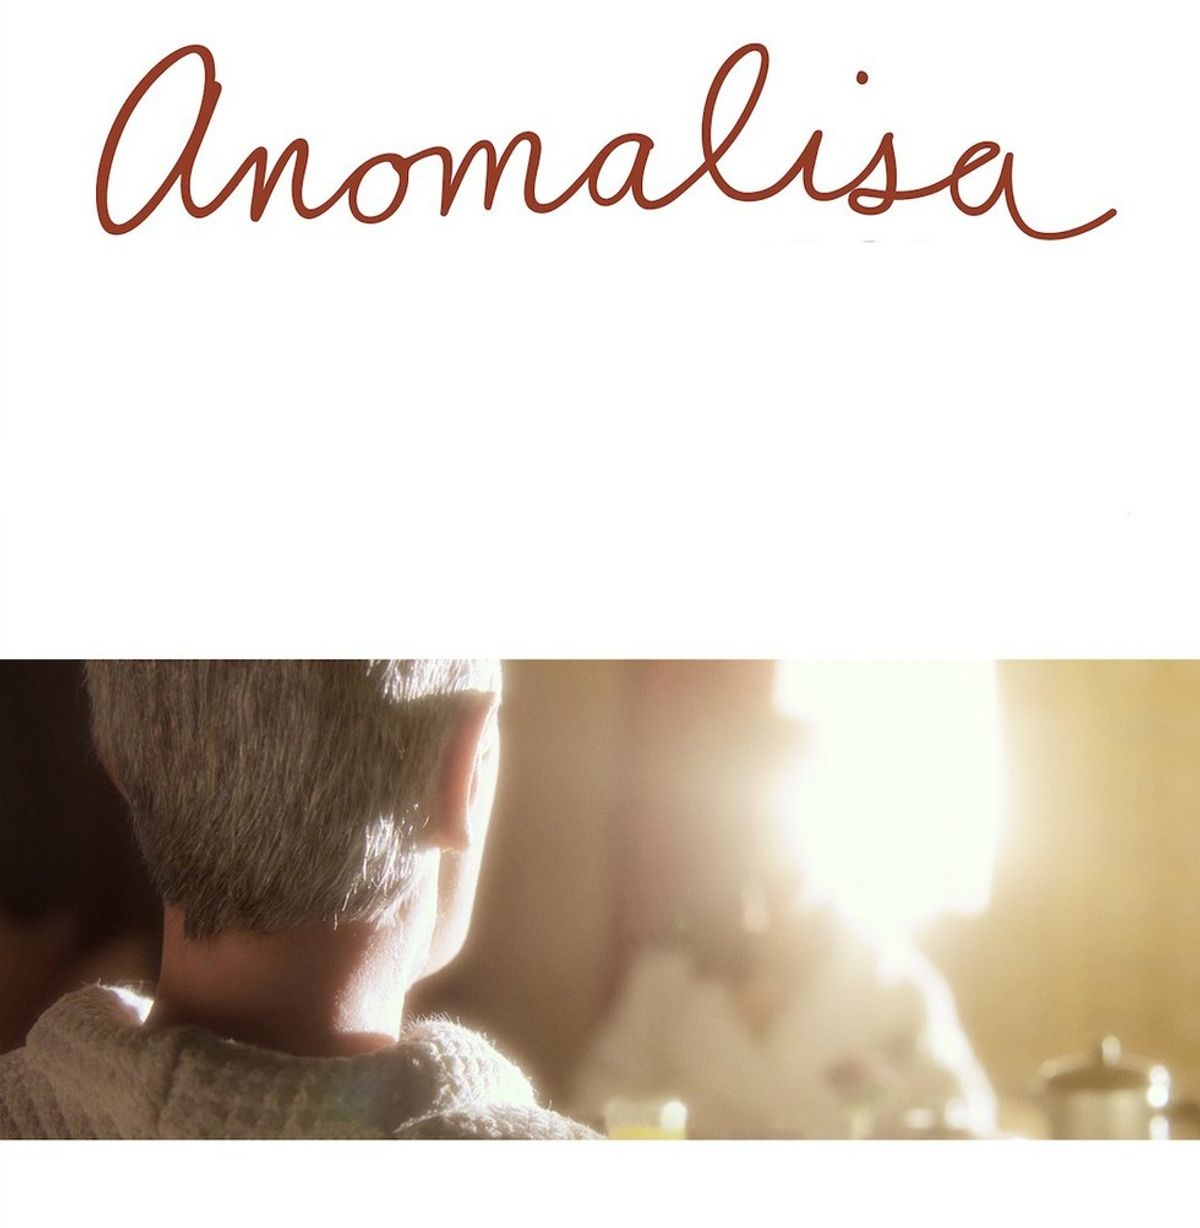 Anomalisa: A Savage Review and Analysis